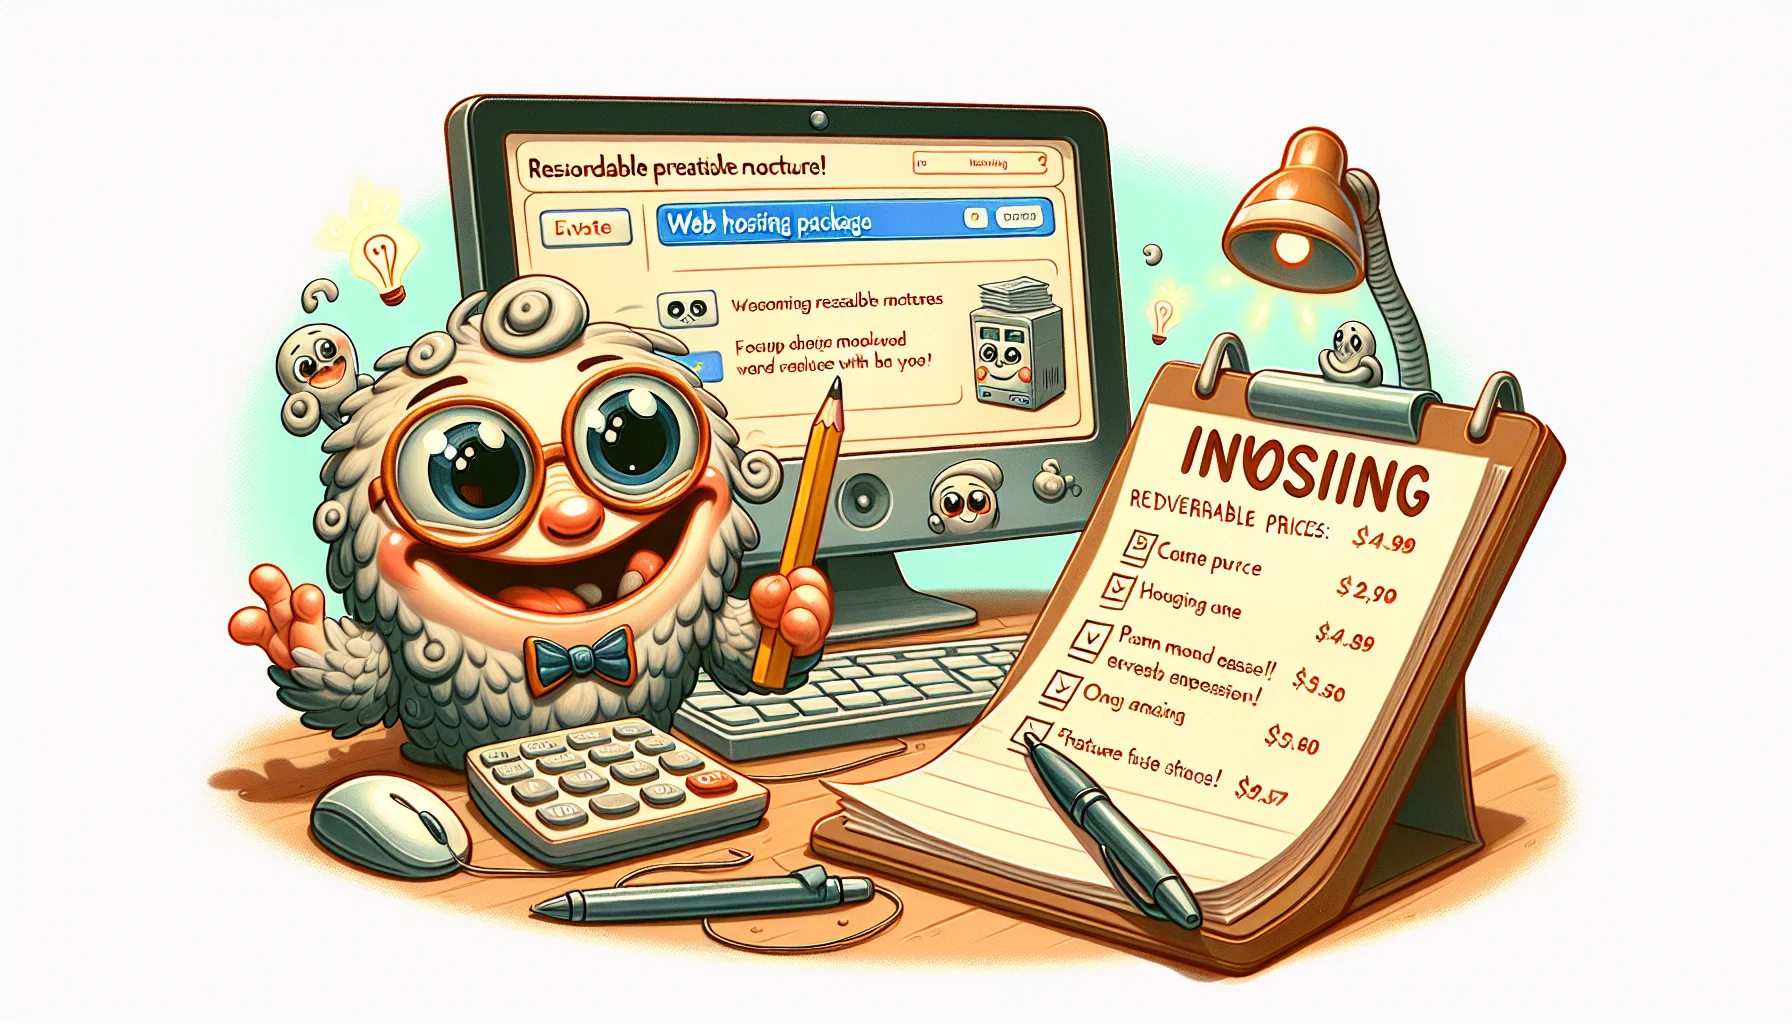 Create a humorous scenario depicting a whimsical character interacting with a notepad, pen, and computer. The notepad is titled 'Invoicing' and the character appears to be delightfully surprised by the reasonable prices on the screen, showcasing an appealing web hosting package. The computer is displaying the charming and intuitive user interface, embodying the ease of use, and the notepad contains few lists of features being offered with the package, which all adds a dose of humor and upbeat tone to the scene.